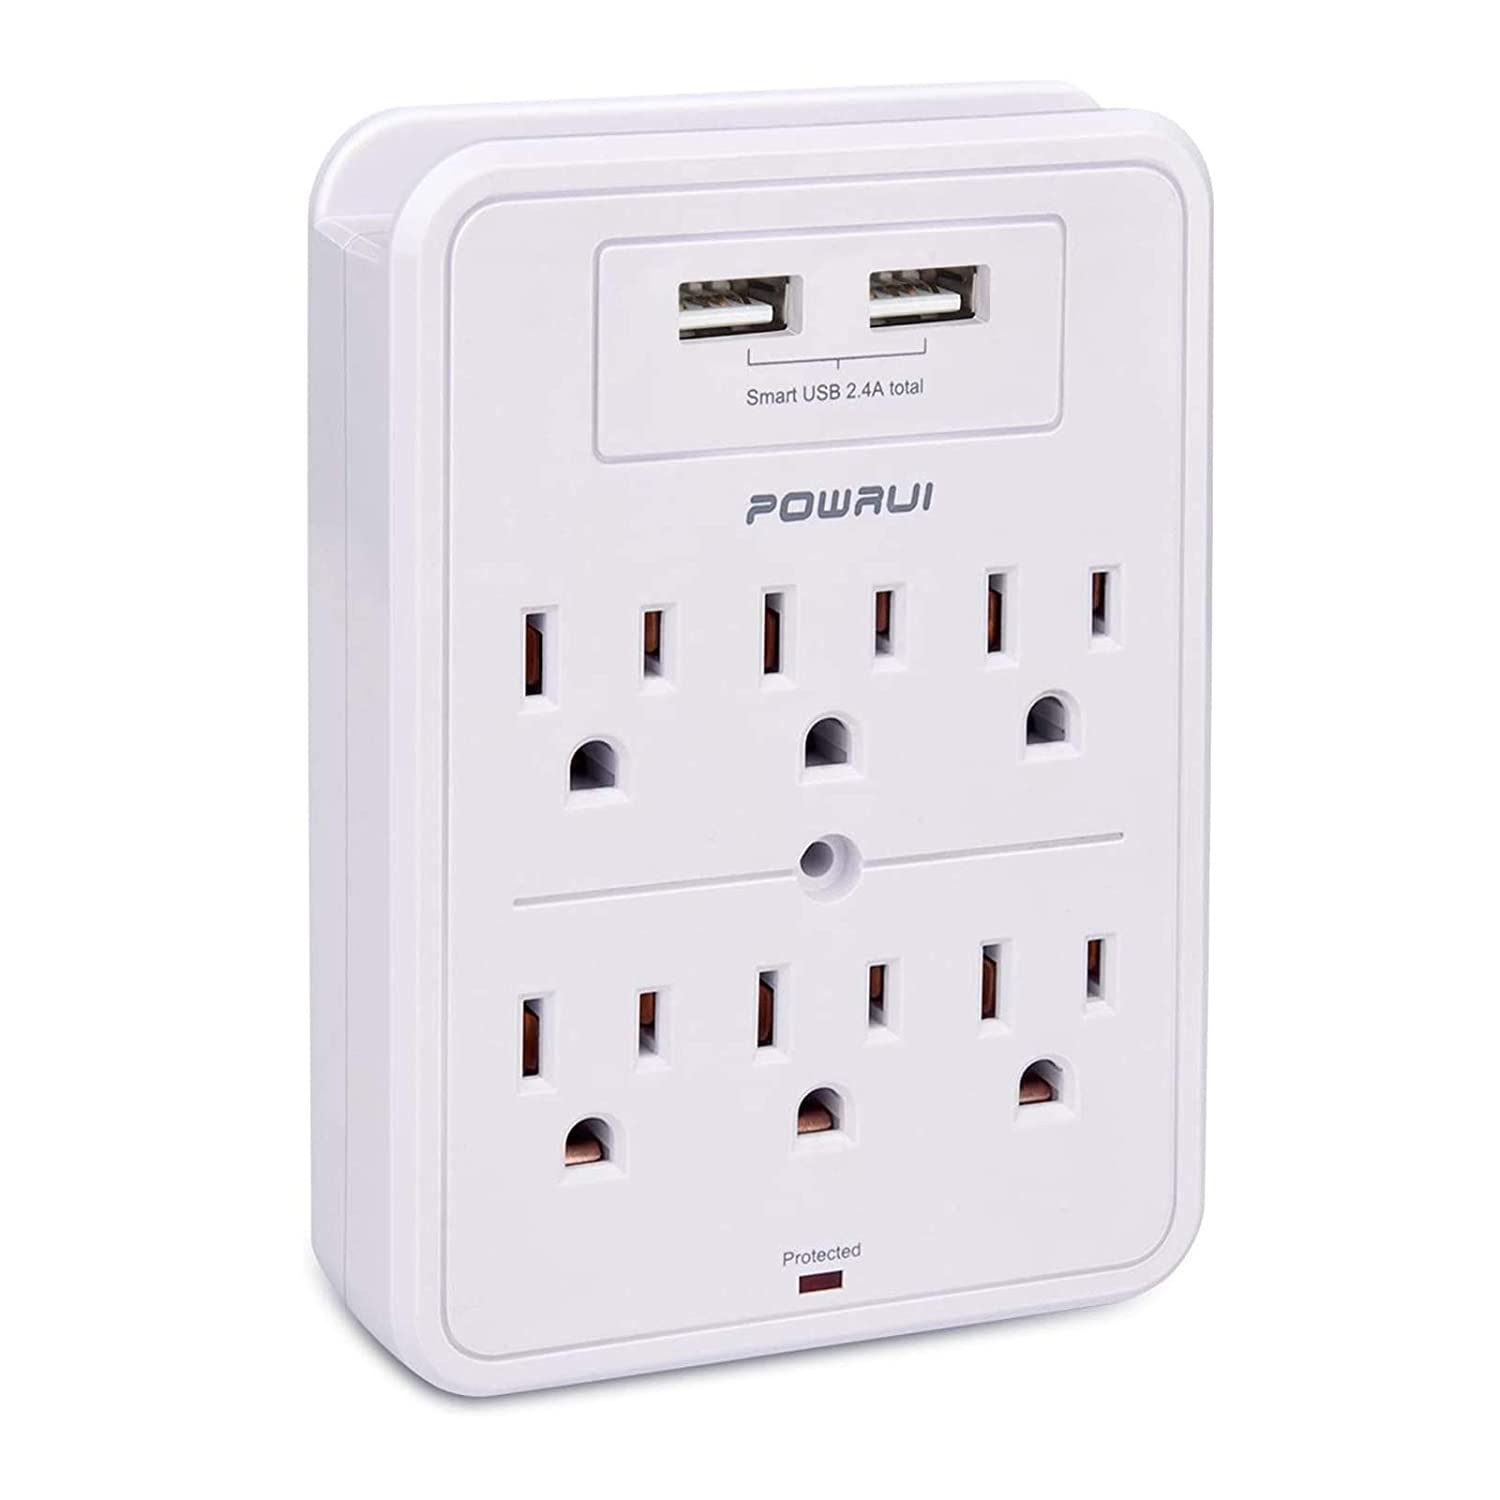 POWRUI Rechargeable Professional In-Wall Surge Protector, 6-Outlet